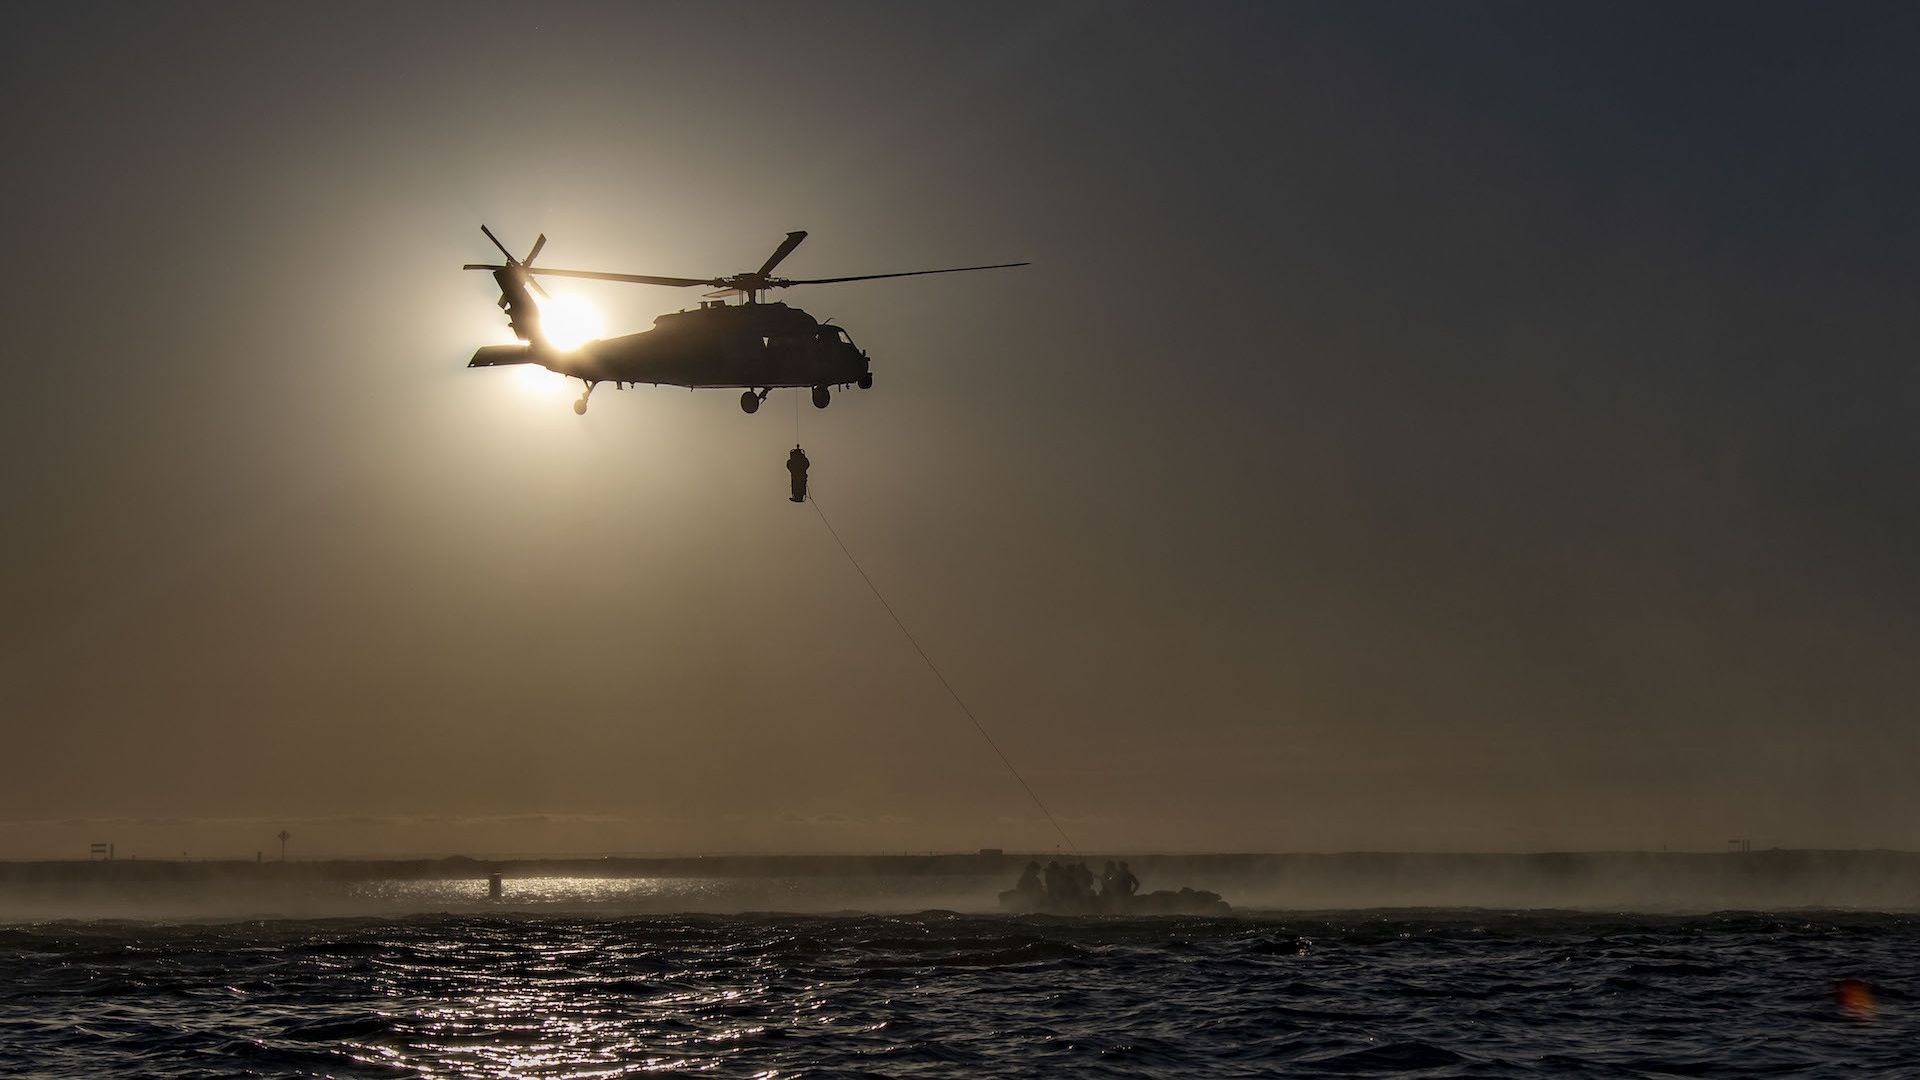 A Navy recovery team will pick up NASA astronauts after their flight capsule lands in the ocean south of San Diego 